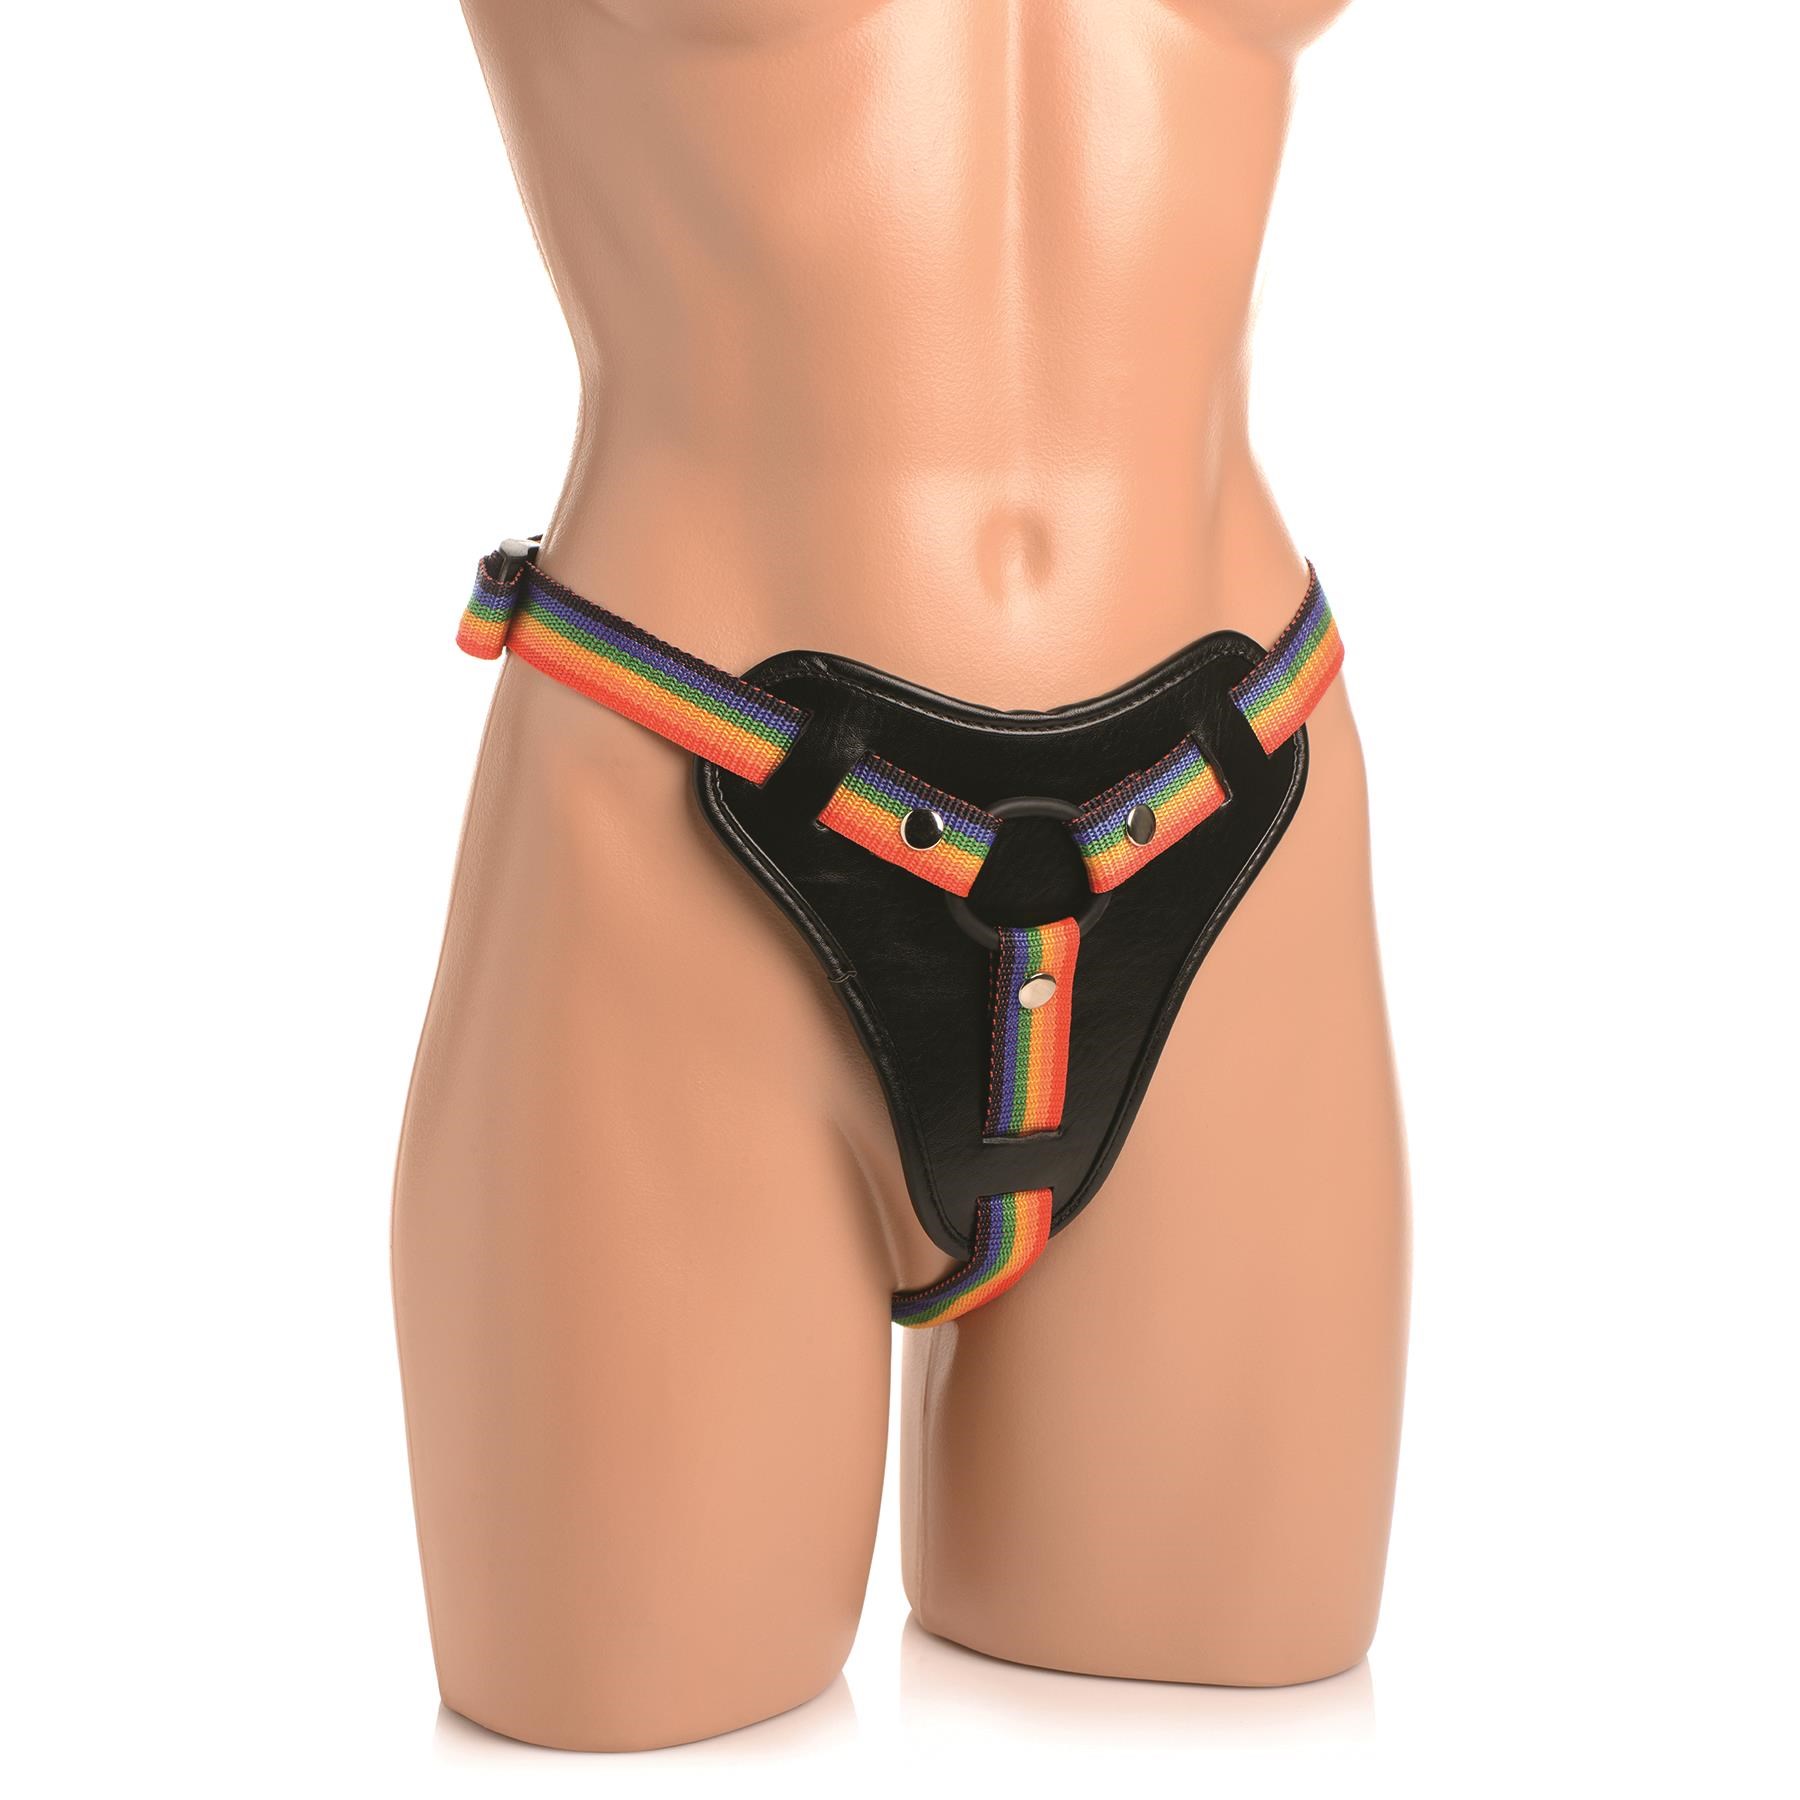 Take The Rainbow Universal Harness - Product Shot on Mannequin